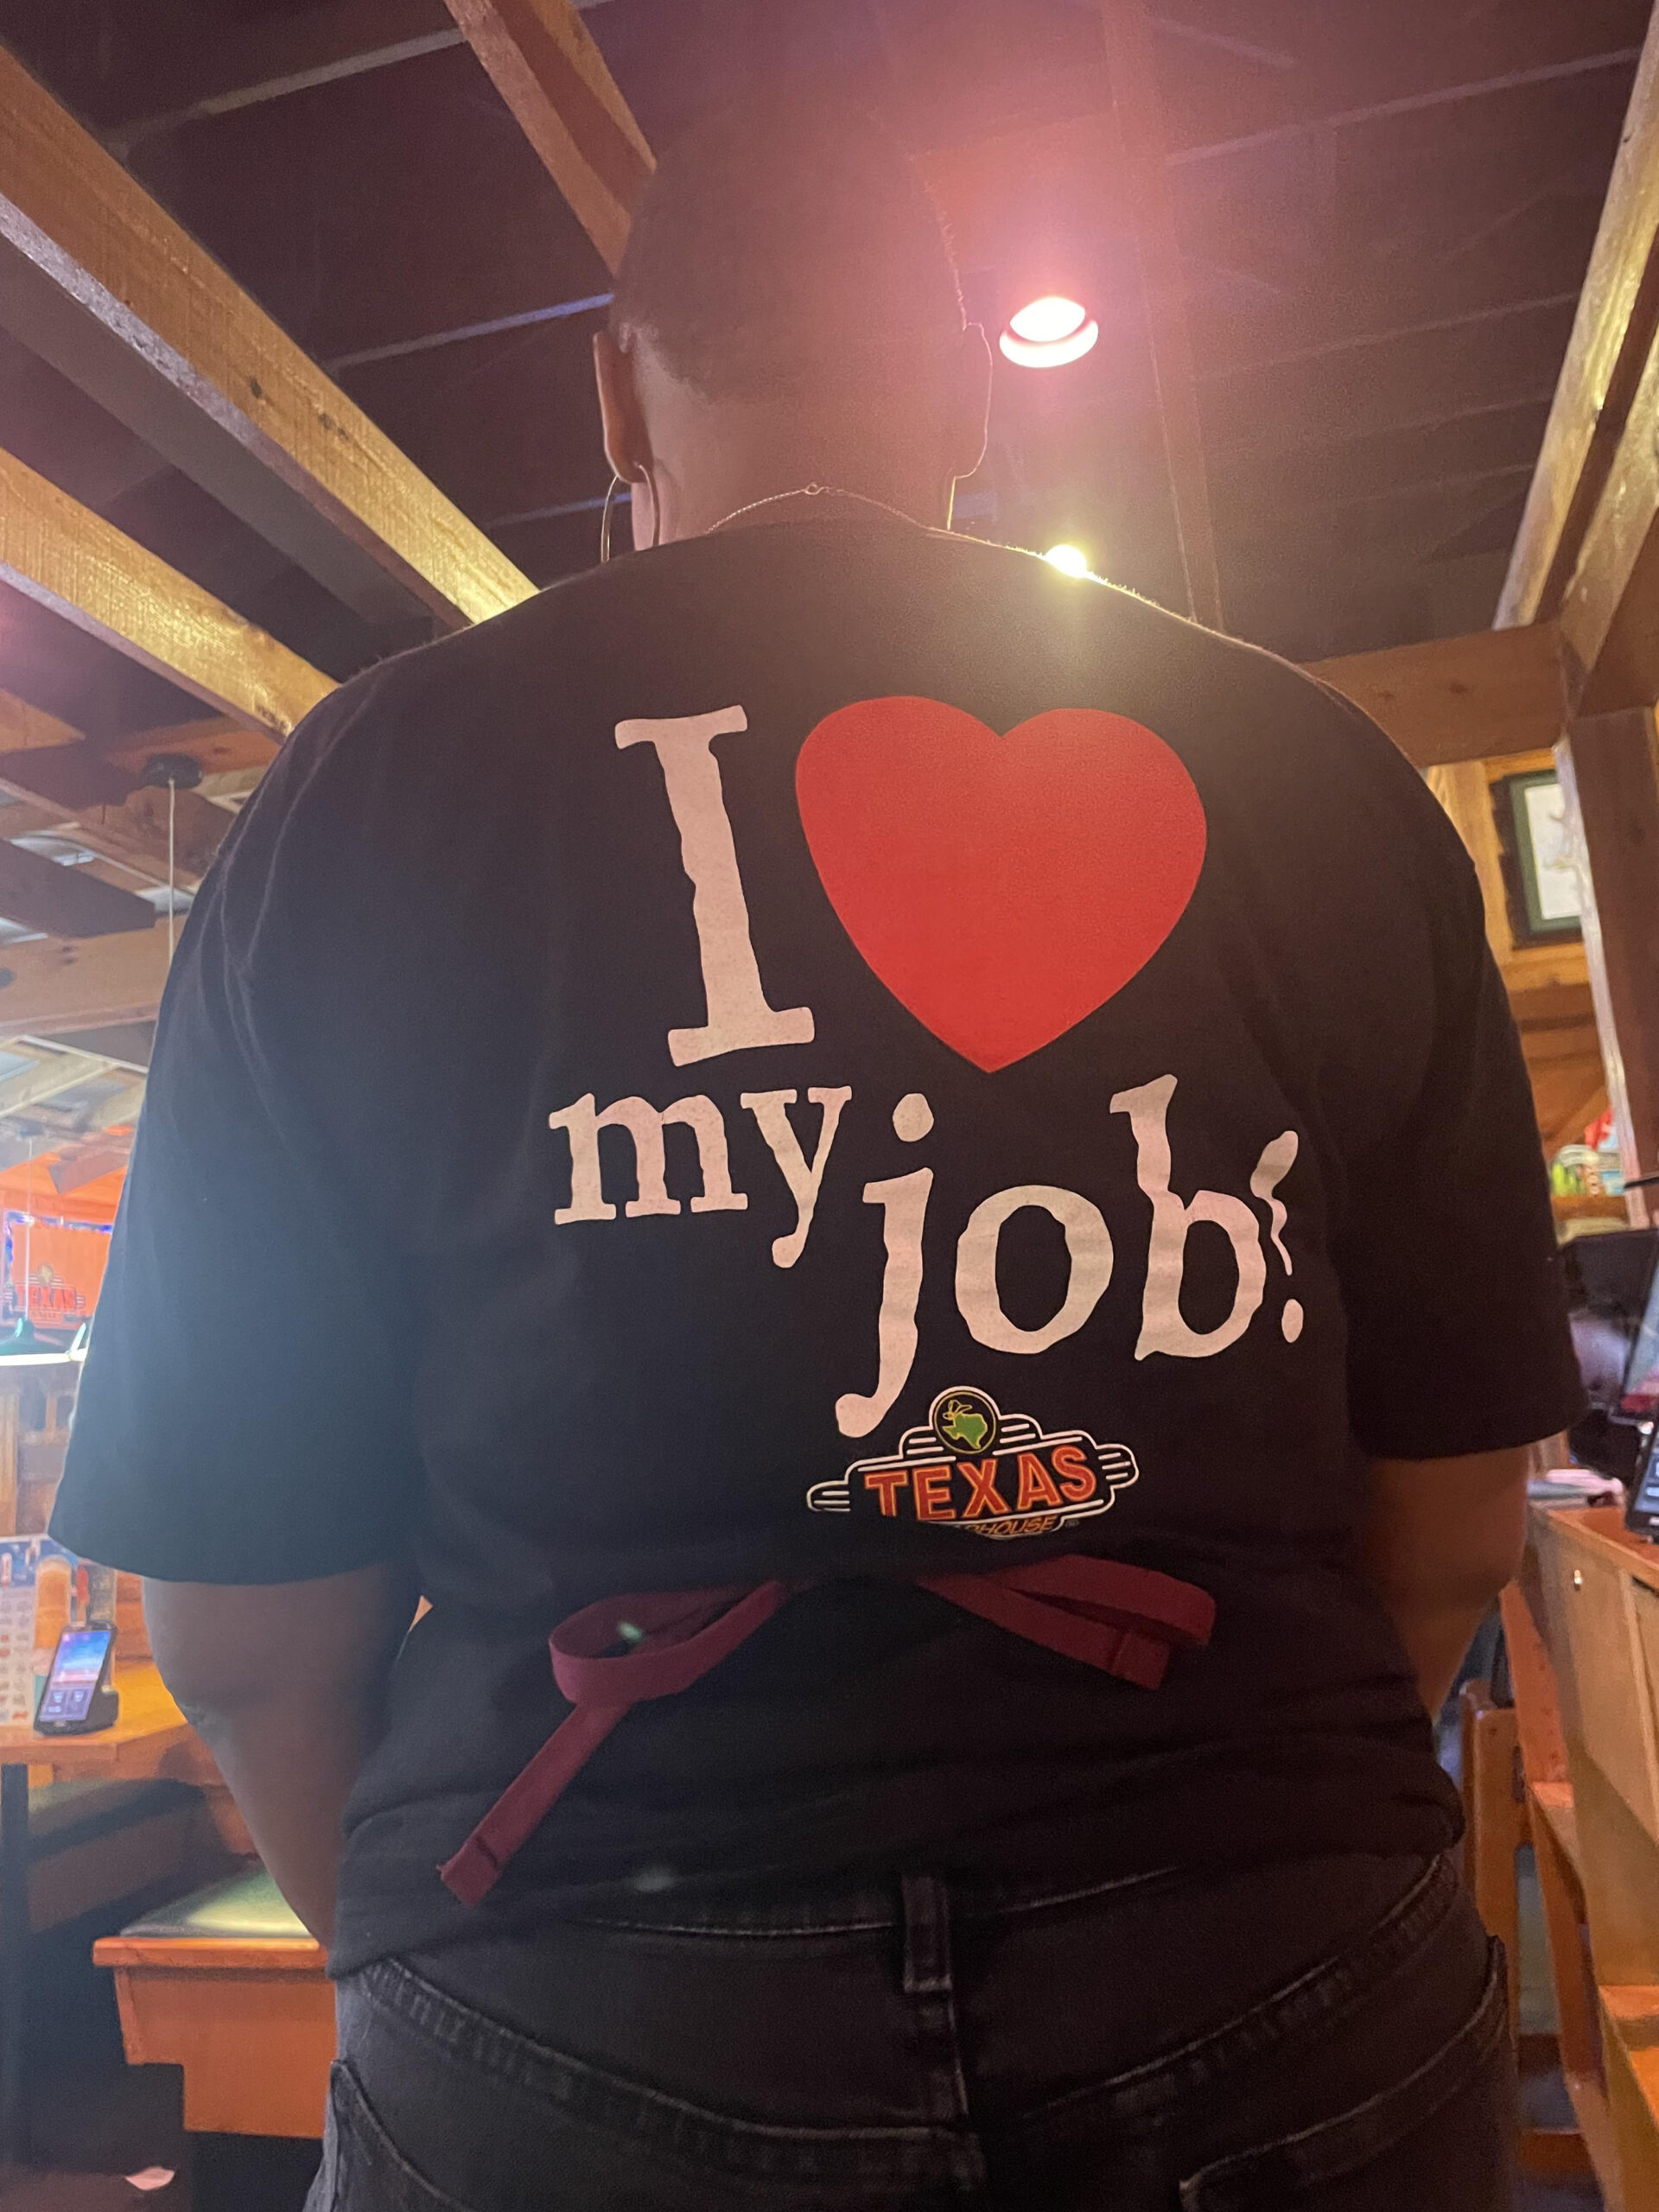 Went To Texas Roadhouse And These Were On The Backs Of Nearly pertaining to Texas Roadhouse W2 Former Employee